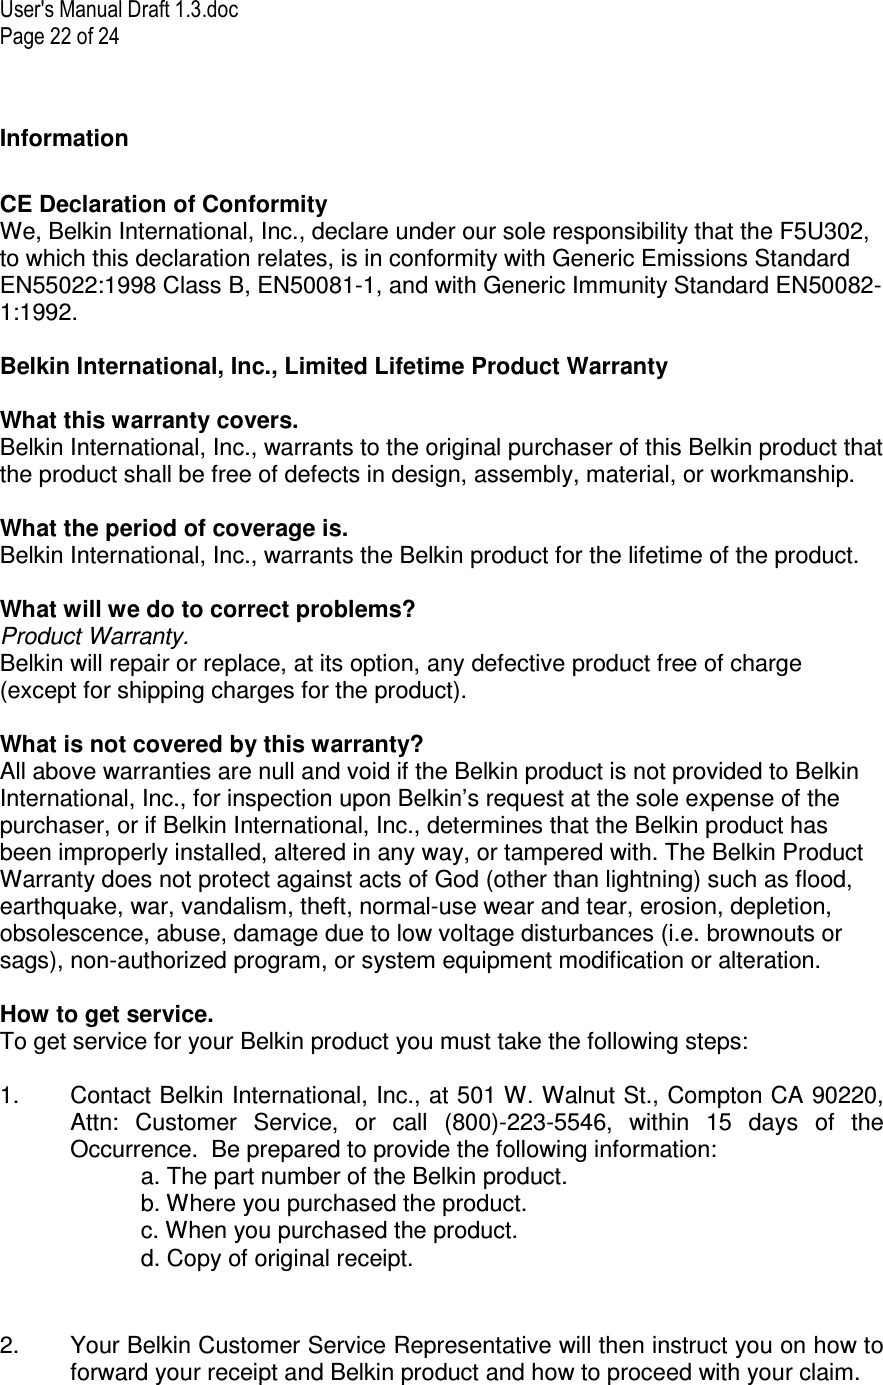 User&apos;s Manual Draft 1.3.doc Page 22 of 24 Information  CE Declaration of Conformity We, Belkin International, Inc., declare under our sole responsibility that the F5U302, to which this declaration relates, is in conformity with Generic Emissions Standard EN55022:1998 Class B, EN50081-1, and with Generic Immunity Standard EN50082-1:1992.  Belkin International, Inc., Limited Lifetime Product Warranty  What this warranty covers. Belkin International, Inc., warrants to the original purchaser of this Belkin product that the product shall be free of defects in design, assembly, material, or workmanship.   What the period of coverage is. Belkin International, Inc., warrants the Belkin product for the lifetime of the product.  What will we do to correct problems?  Product Warranty. Belkin will repair or replace, at its option, any defective product free of charge (except for shipping charges for the product).    What is not covered by this warranty? All above warranties are null and void if the Belkin product is not provided to Belkin International, Inc., for inspection upon Belkin’s request at the sole expense of the purchaser, or if Belkin International, Inc., determines that the Belkin product has been improperly installed, altered in any way, or tampered with. The Belkin Product Warranty does not protect against acts of God (other than lightning) such as flood, earthquake, war, vandalism, theft, normal-use wear and tear, erosion, depletion, obsolescence, abuse, damage due to low voltage disturbances (i.e. brownouts or sags), non-authorized program, or system equipment modification or alteration.  How to get service.    To get service for your Belkin product you must take the following steps:  1.  Contact Belkin International, Inc., at 501 W. Walnut St., Compton CA 90220, Attn:  Customer  Service,  or  call  (800)-223-5546,  within  15  days  of  the Occurrence.  Be prepared to provide the following information: a. The part number of the Belkin product. b. Where you purchased the product. c. When you purchased the product. d. Copy of original receipt.  2.  Your Belkin Customer Service Representative will then instruct you on how to forward your receipt and Belkin product and how to proceed with your claim.  